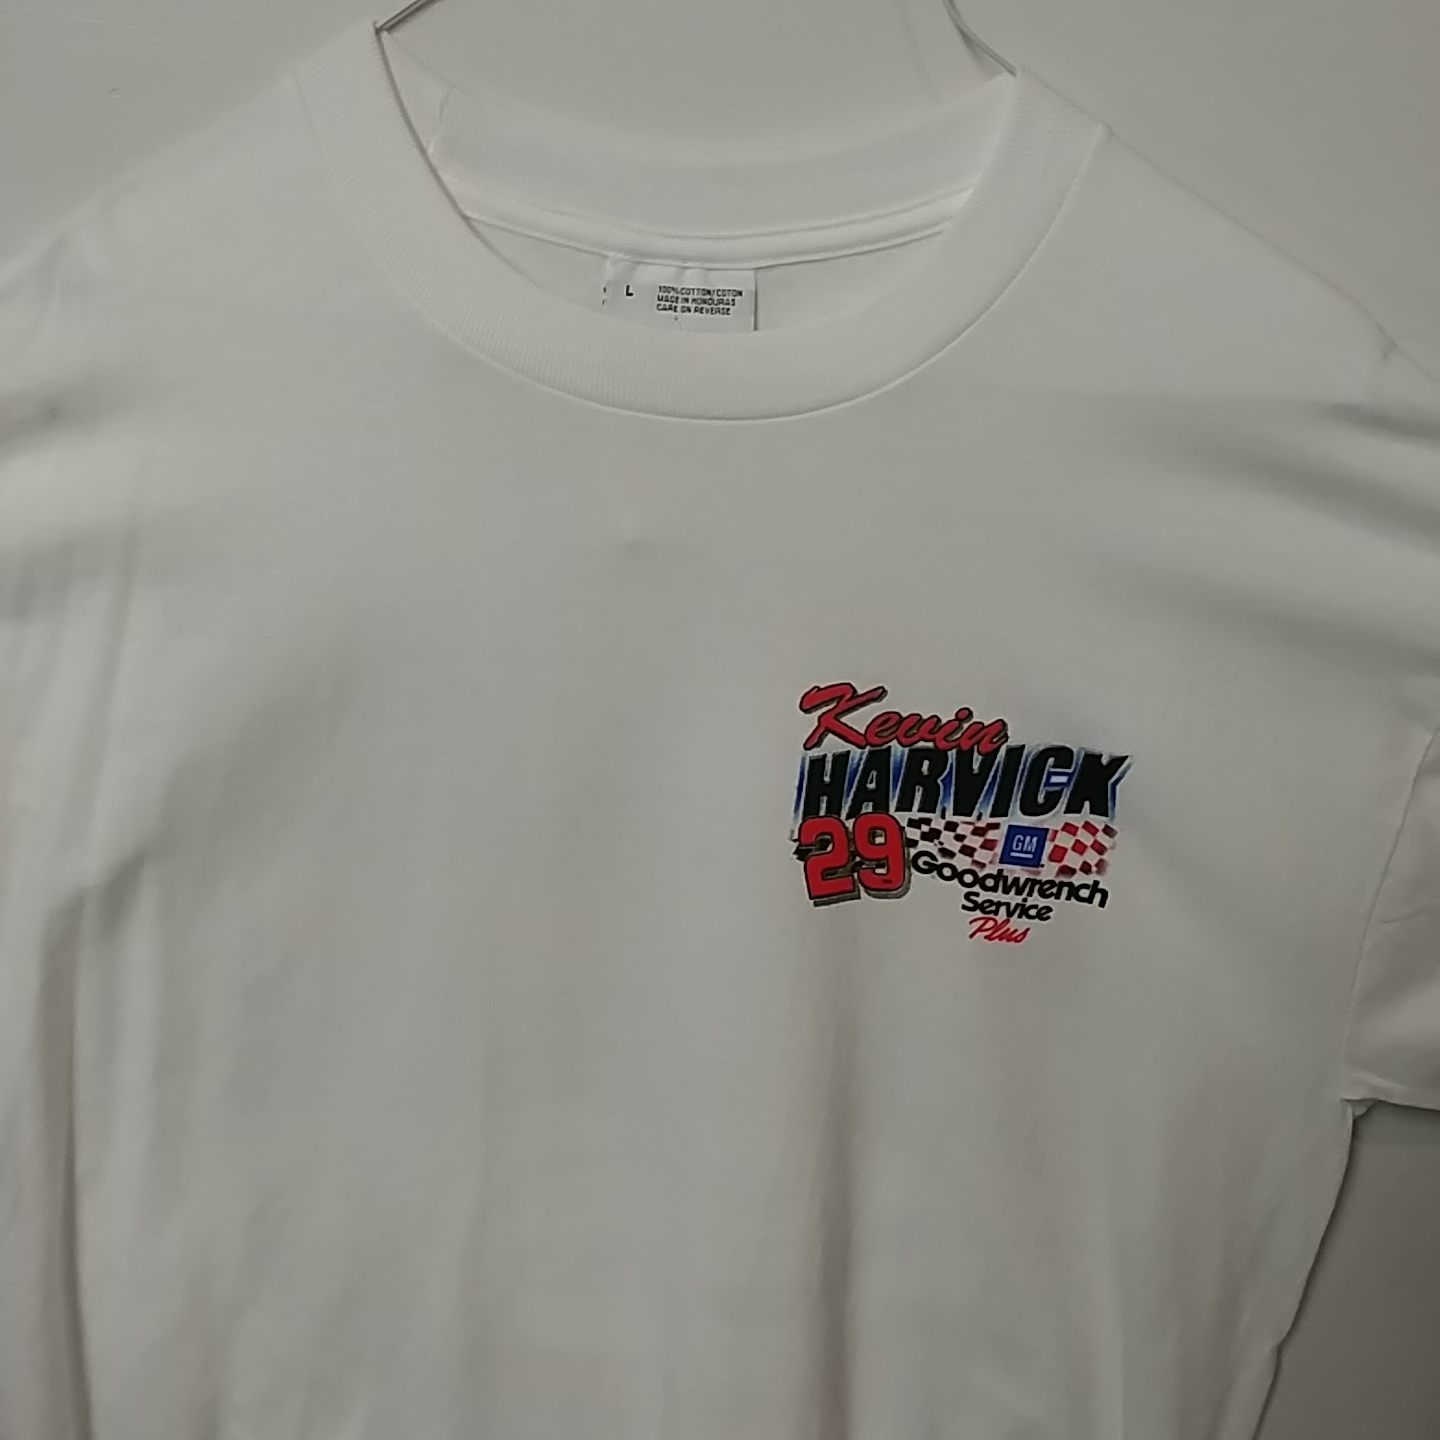 2001 Kevin Harvick GM Goodwrench "The Right Stuff" tee